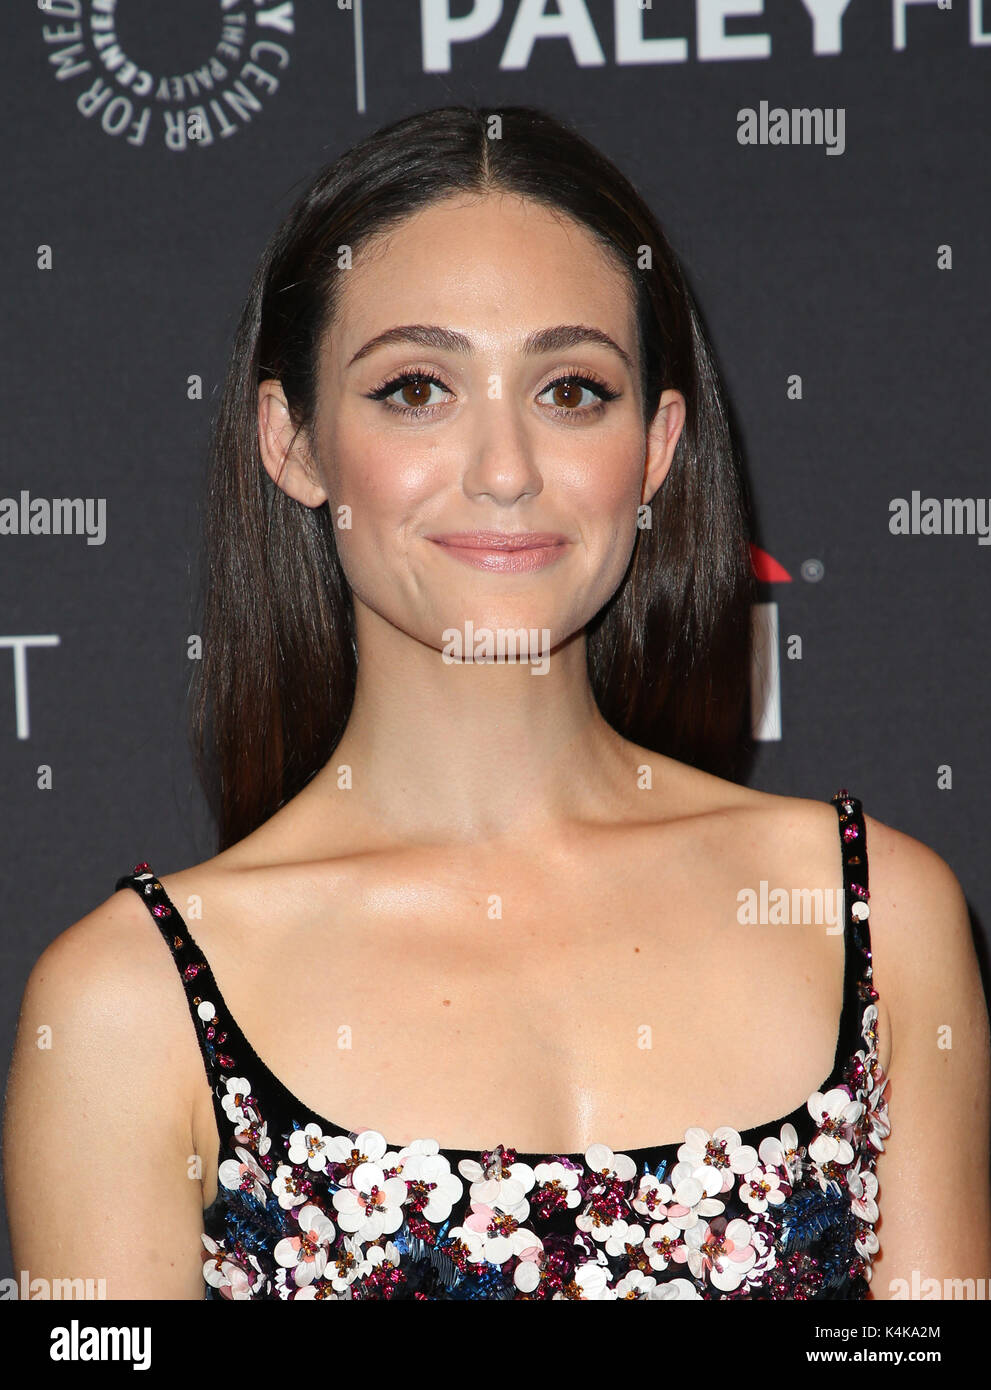 Beverly Hills, Ca. 6th Sep, 2017. Emmy Rossum, At SHAMELESS SCREENING & PANEL DURING THE 11TH ANNUAL PALEYFEST FALL TV PREVIEWS At The Paley Center for Media In California on September 6, 2017. Credit: Faye S/Media Punch/Alamy Live News Stock Photo